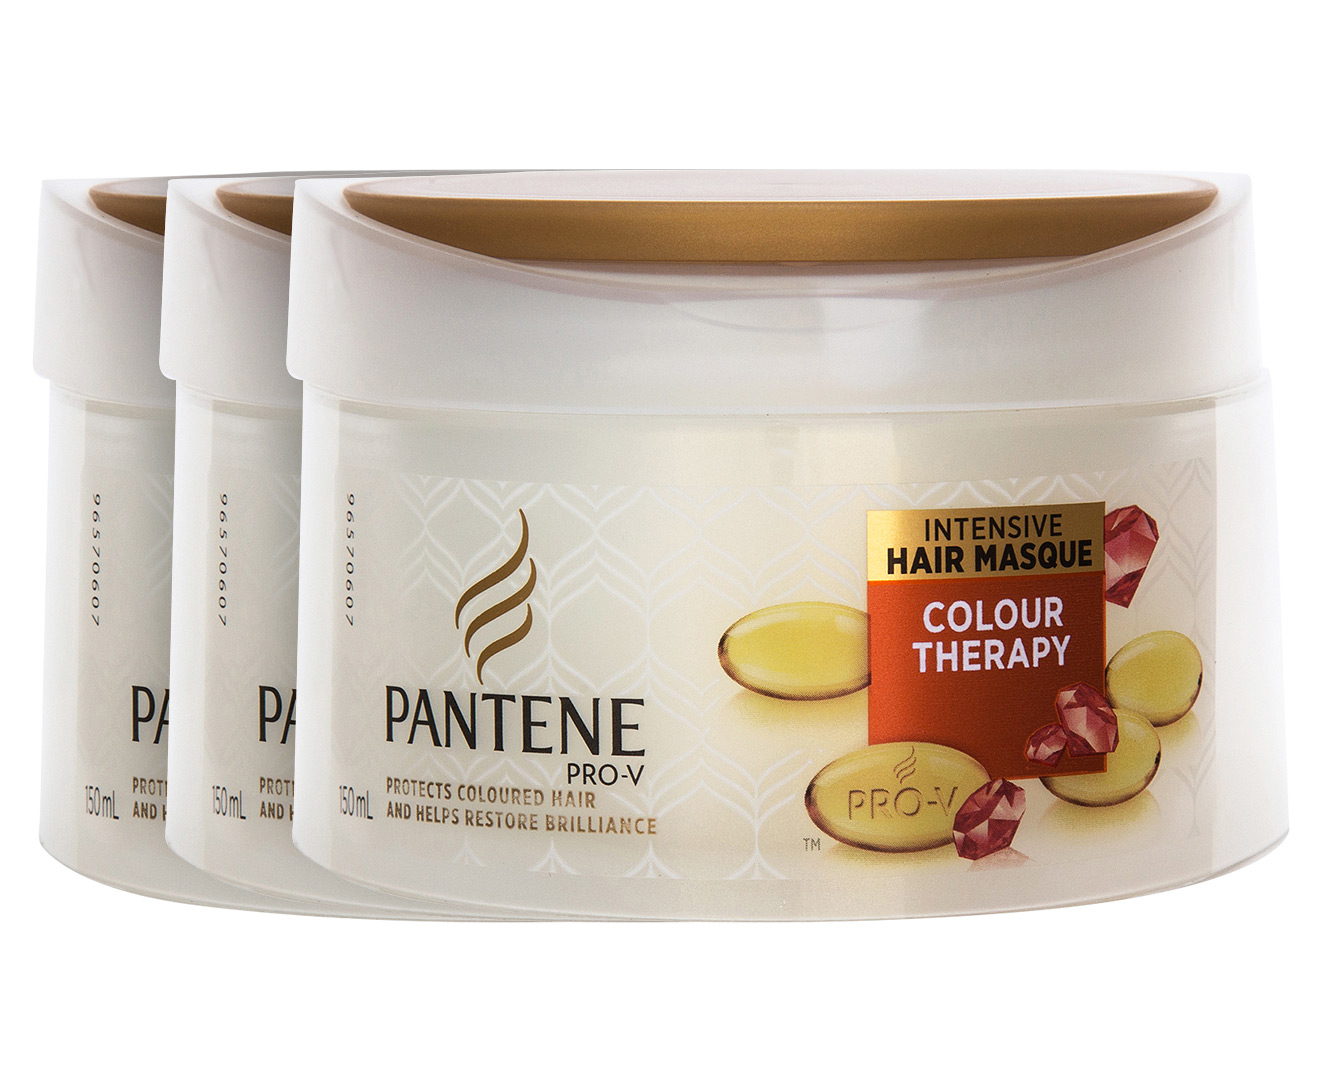 3 x Pantene Pro-V Colour Therapy Intensive Hair Masque 150mL